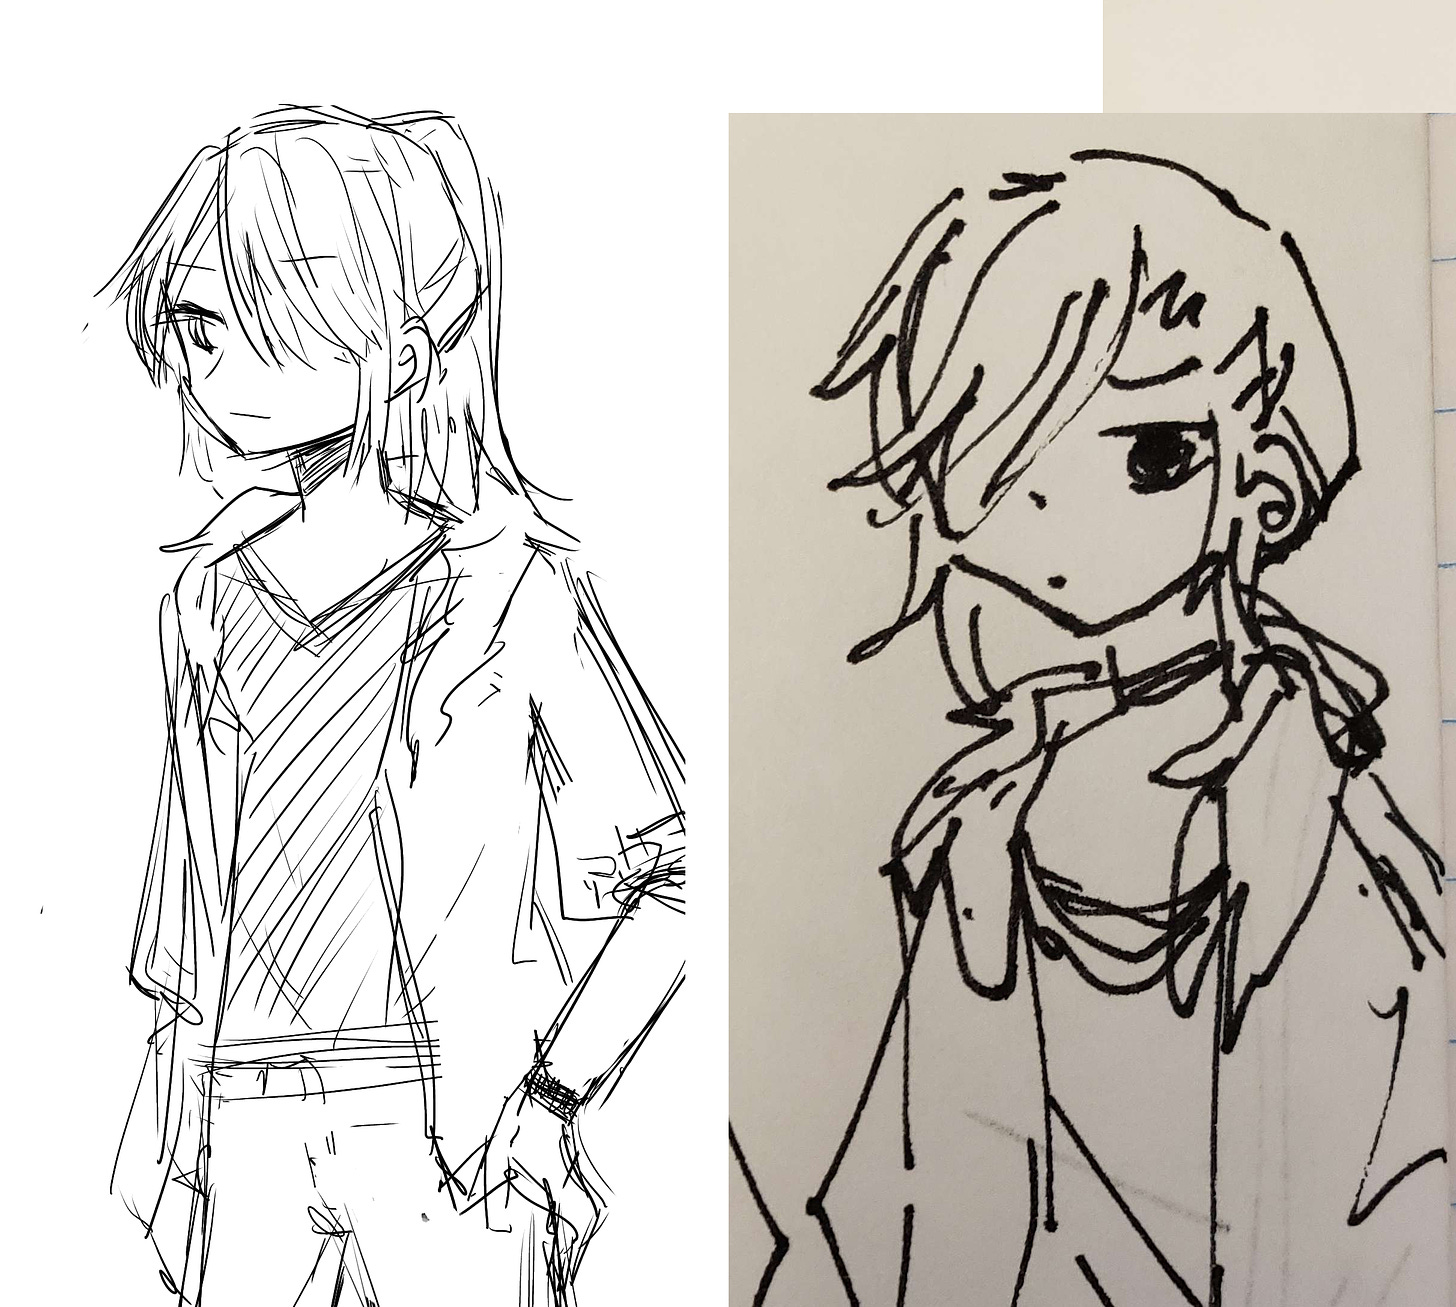 rough sketches of Hailu with ponytail and rough bangs